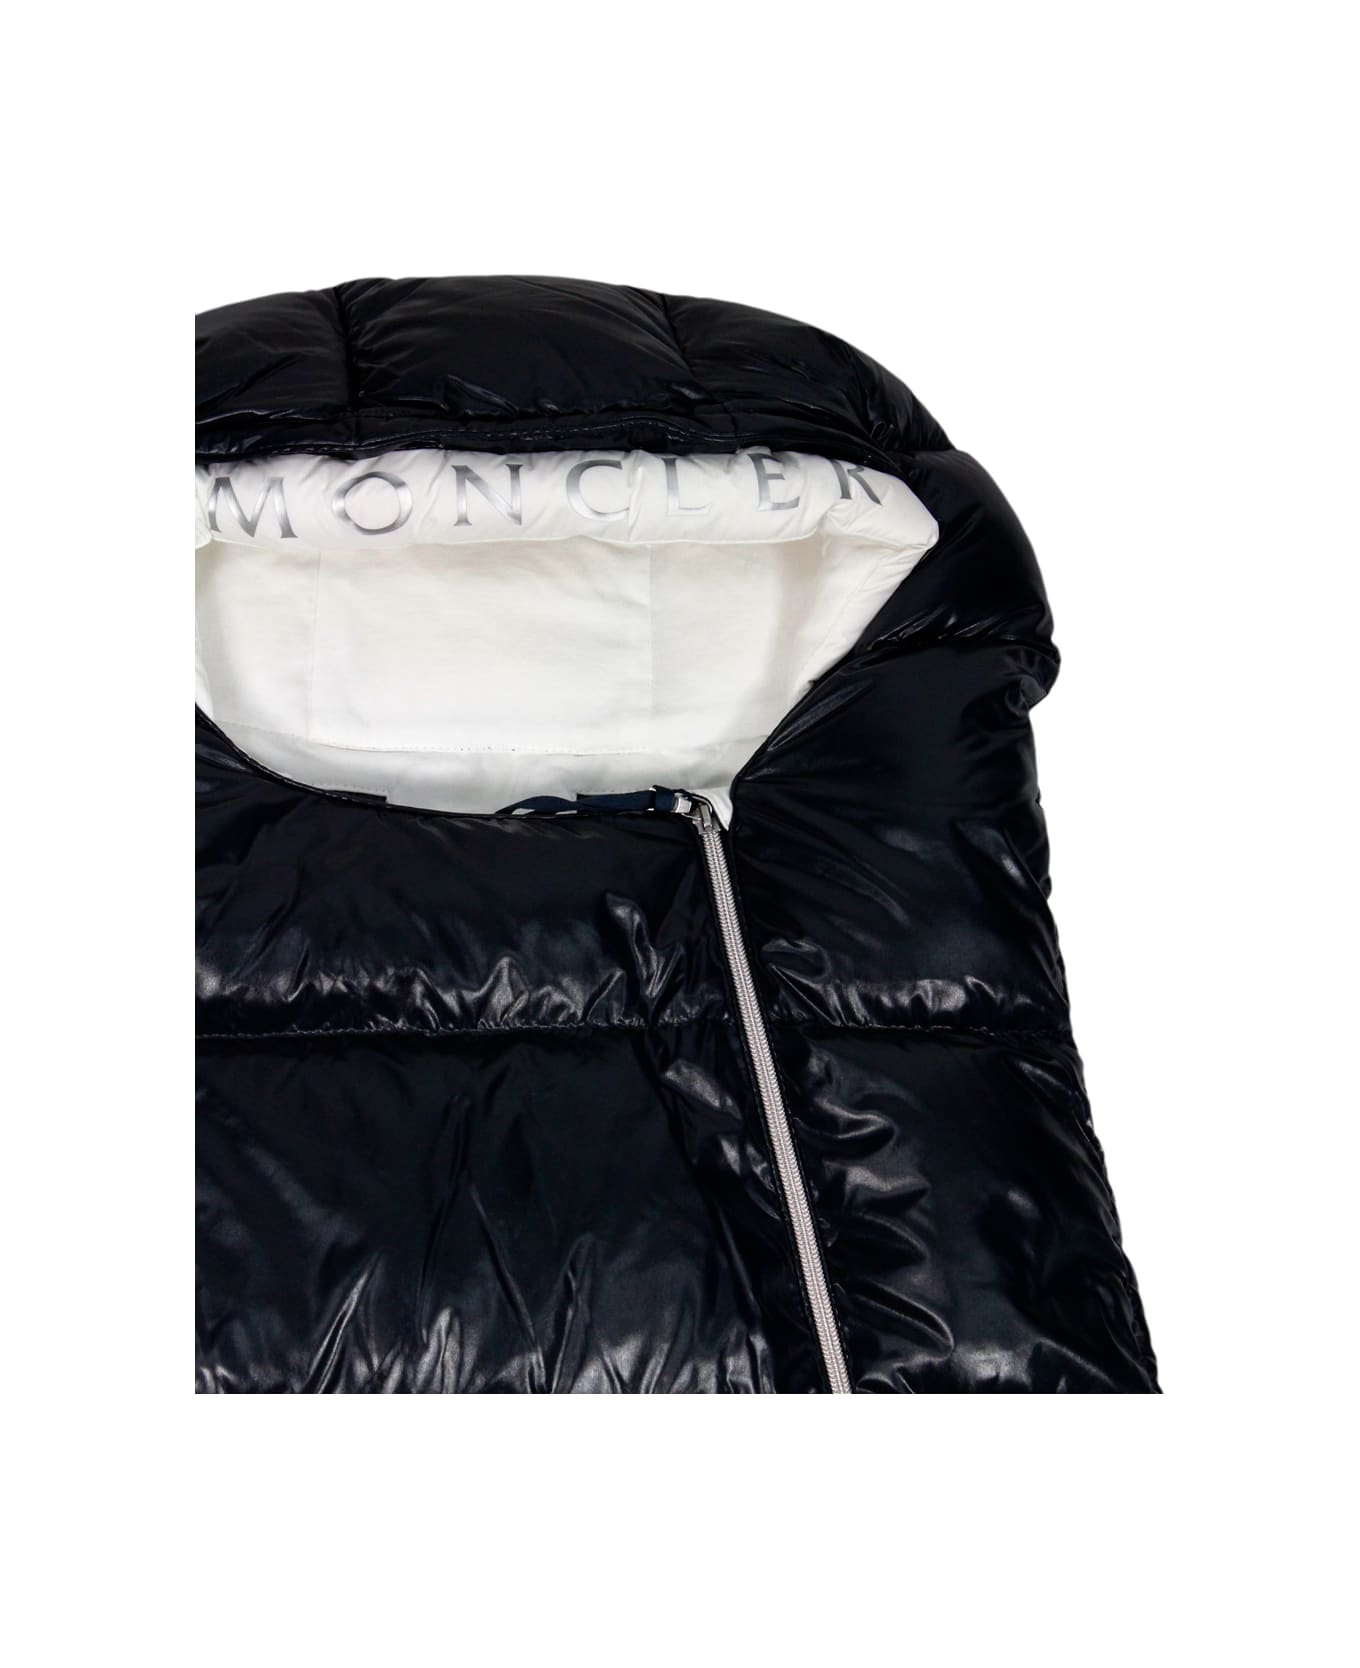 Moncler Baby Carrier Padded With Real Goose Down With Side Opening That Opens Completely With Writing On The Hood Profile And Internal Breathable Cotton - Blu